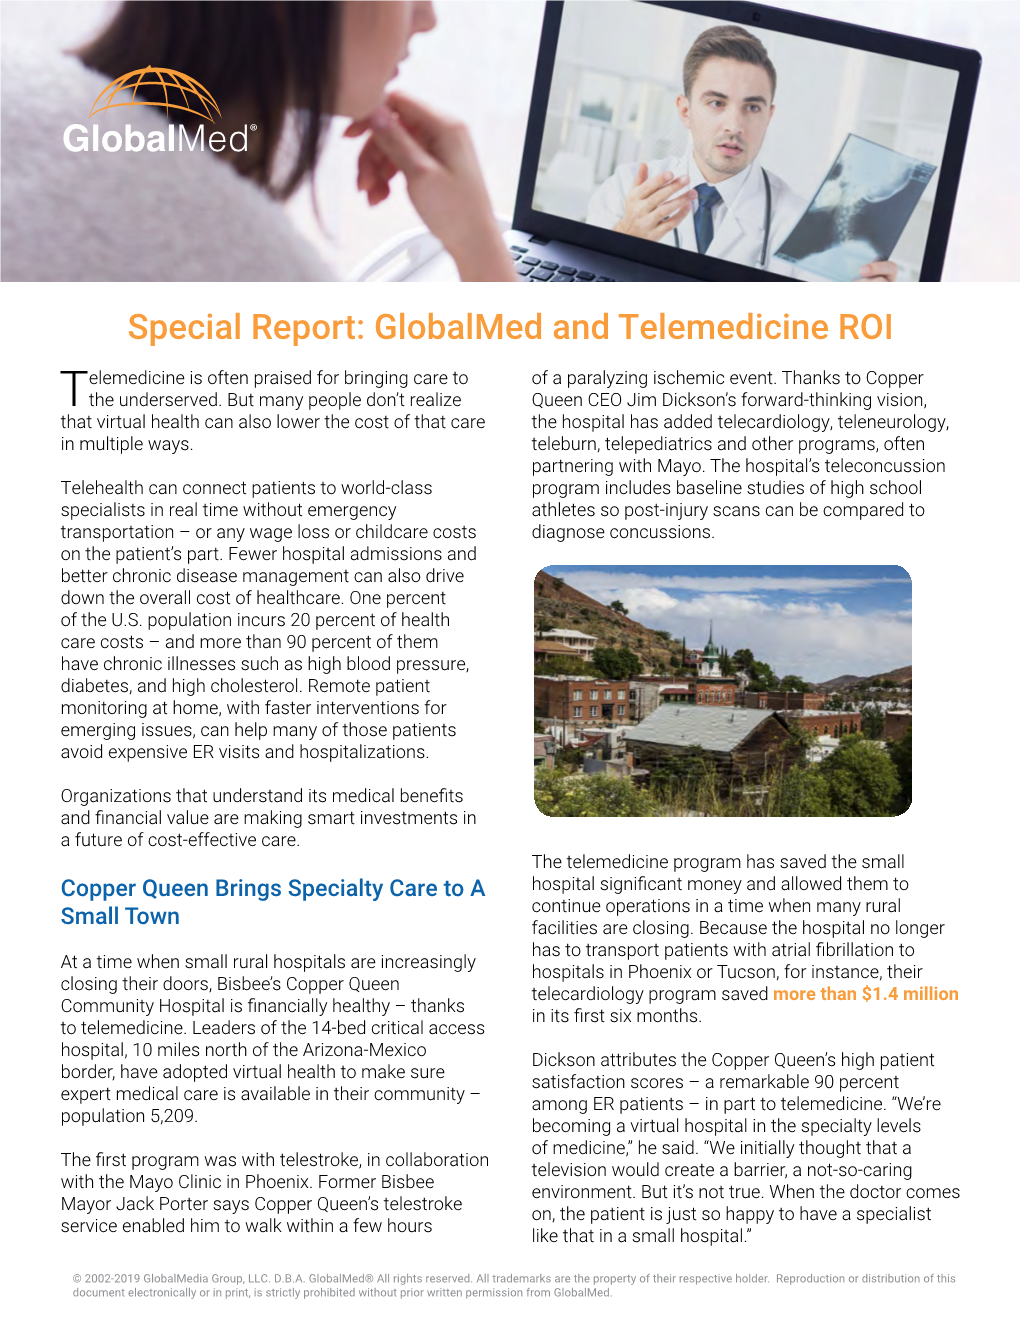 Special Report: Globalmed and Telemedicine ROI